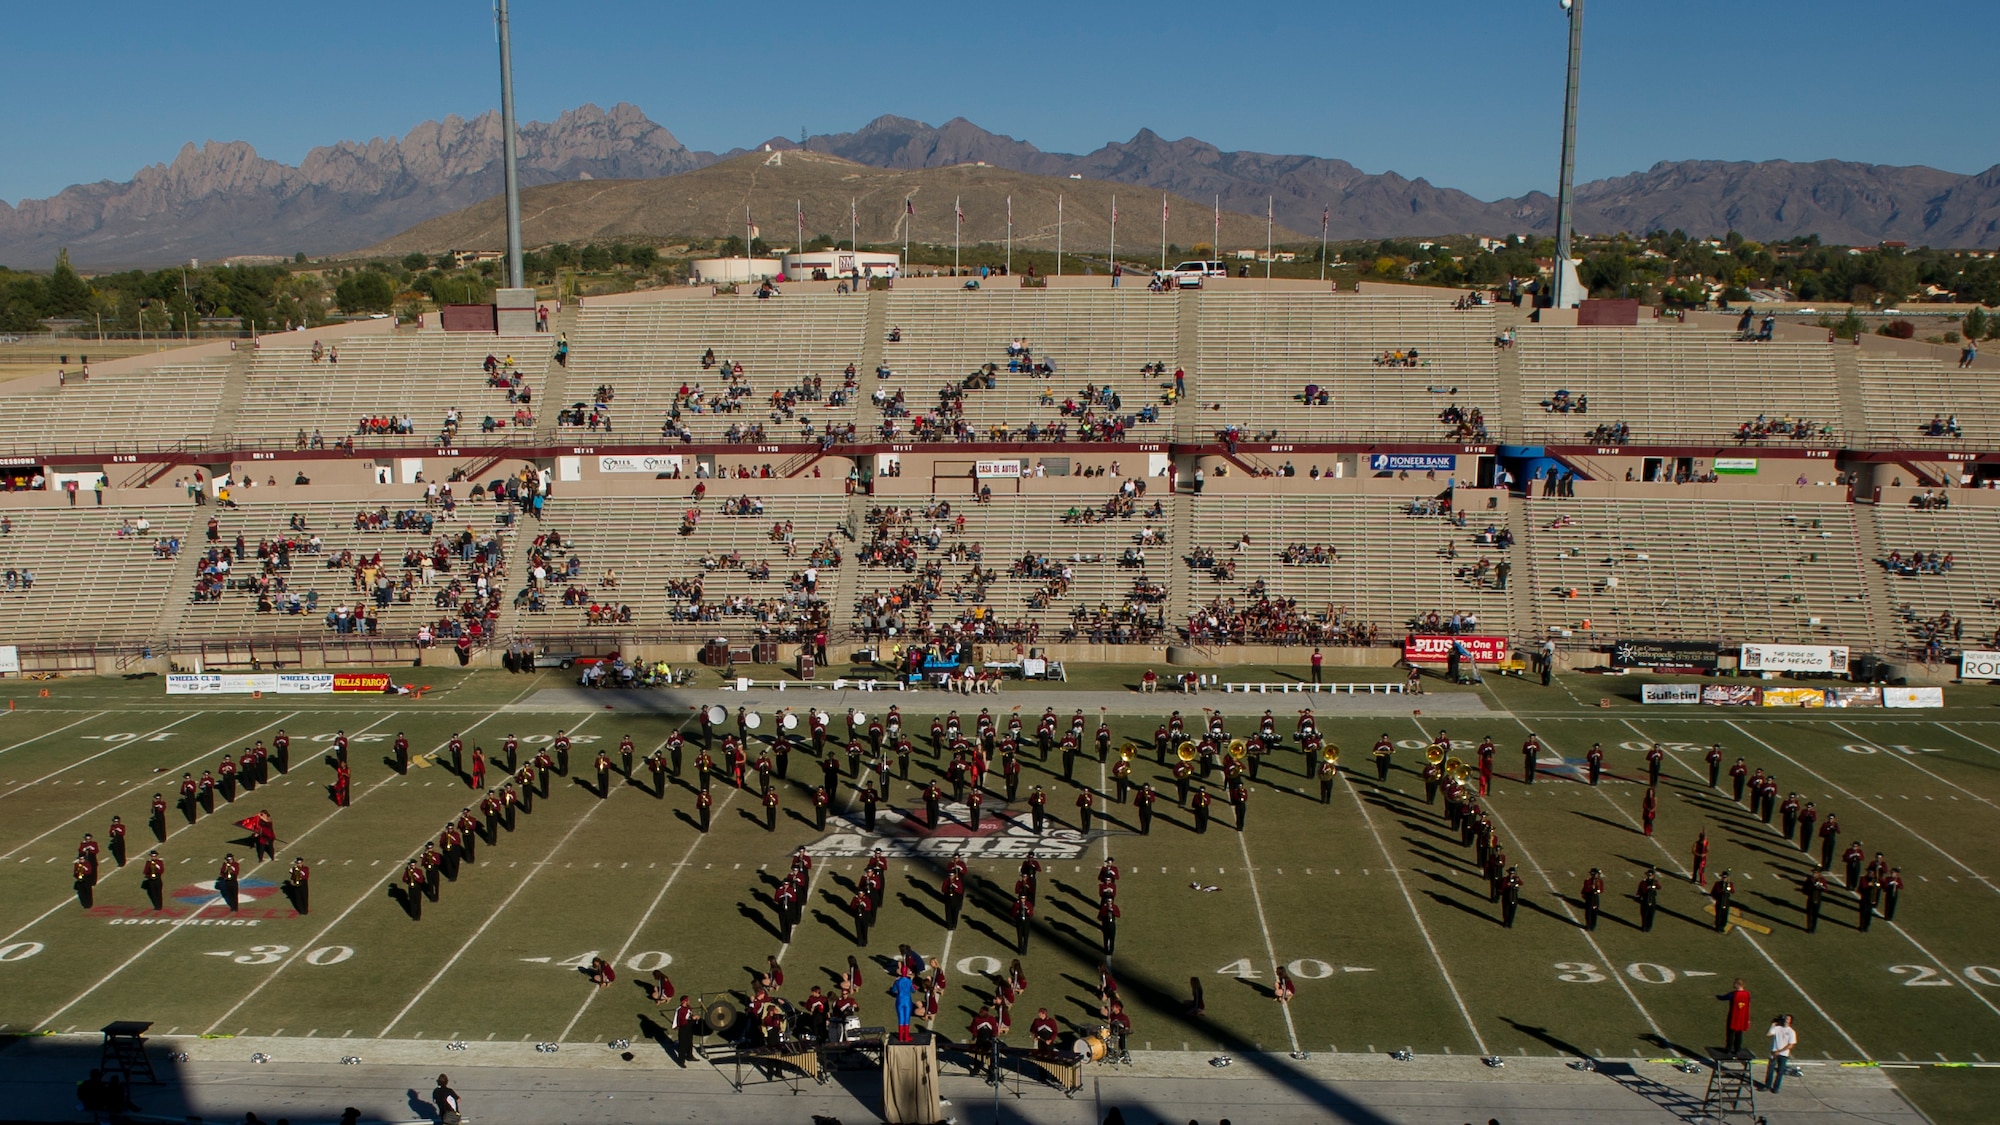 The Pride of New Mexico Marching Band performs during the halftime show at Aggie Memorial Stadium in Las Cruces, N.M., Nov. 9. NMSU hosted Boston College for their annual military appreciation game, which honored current and past military veterans. (U.S. Air Force photo by Airman 1st Class Aaron Montoya/Released)